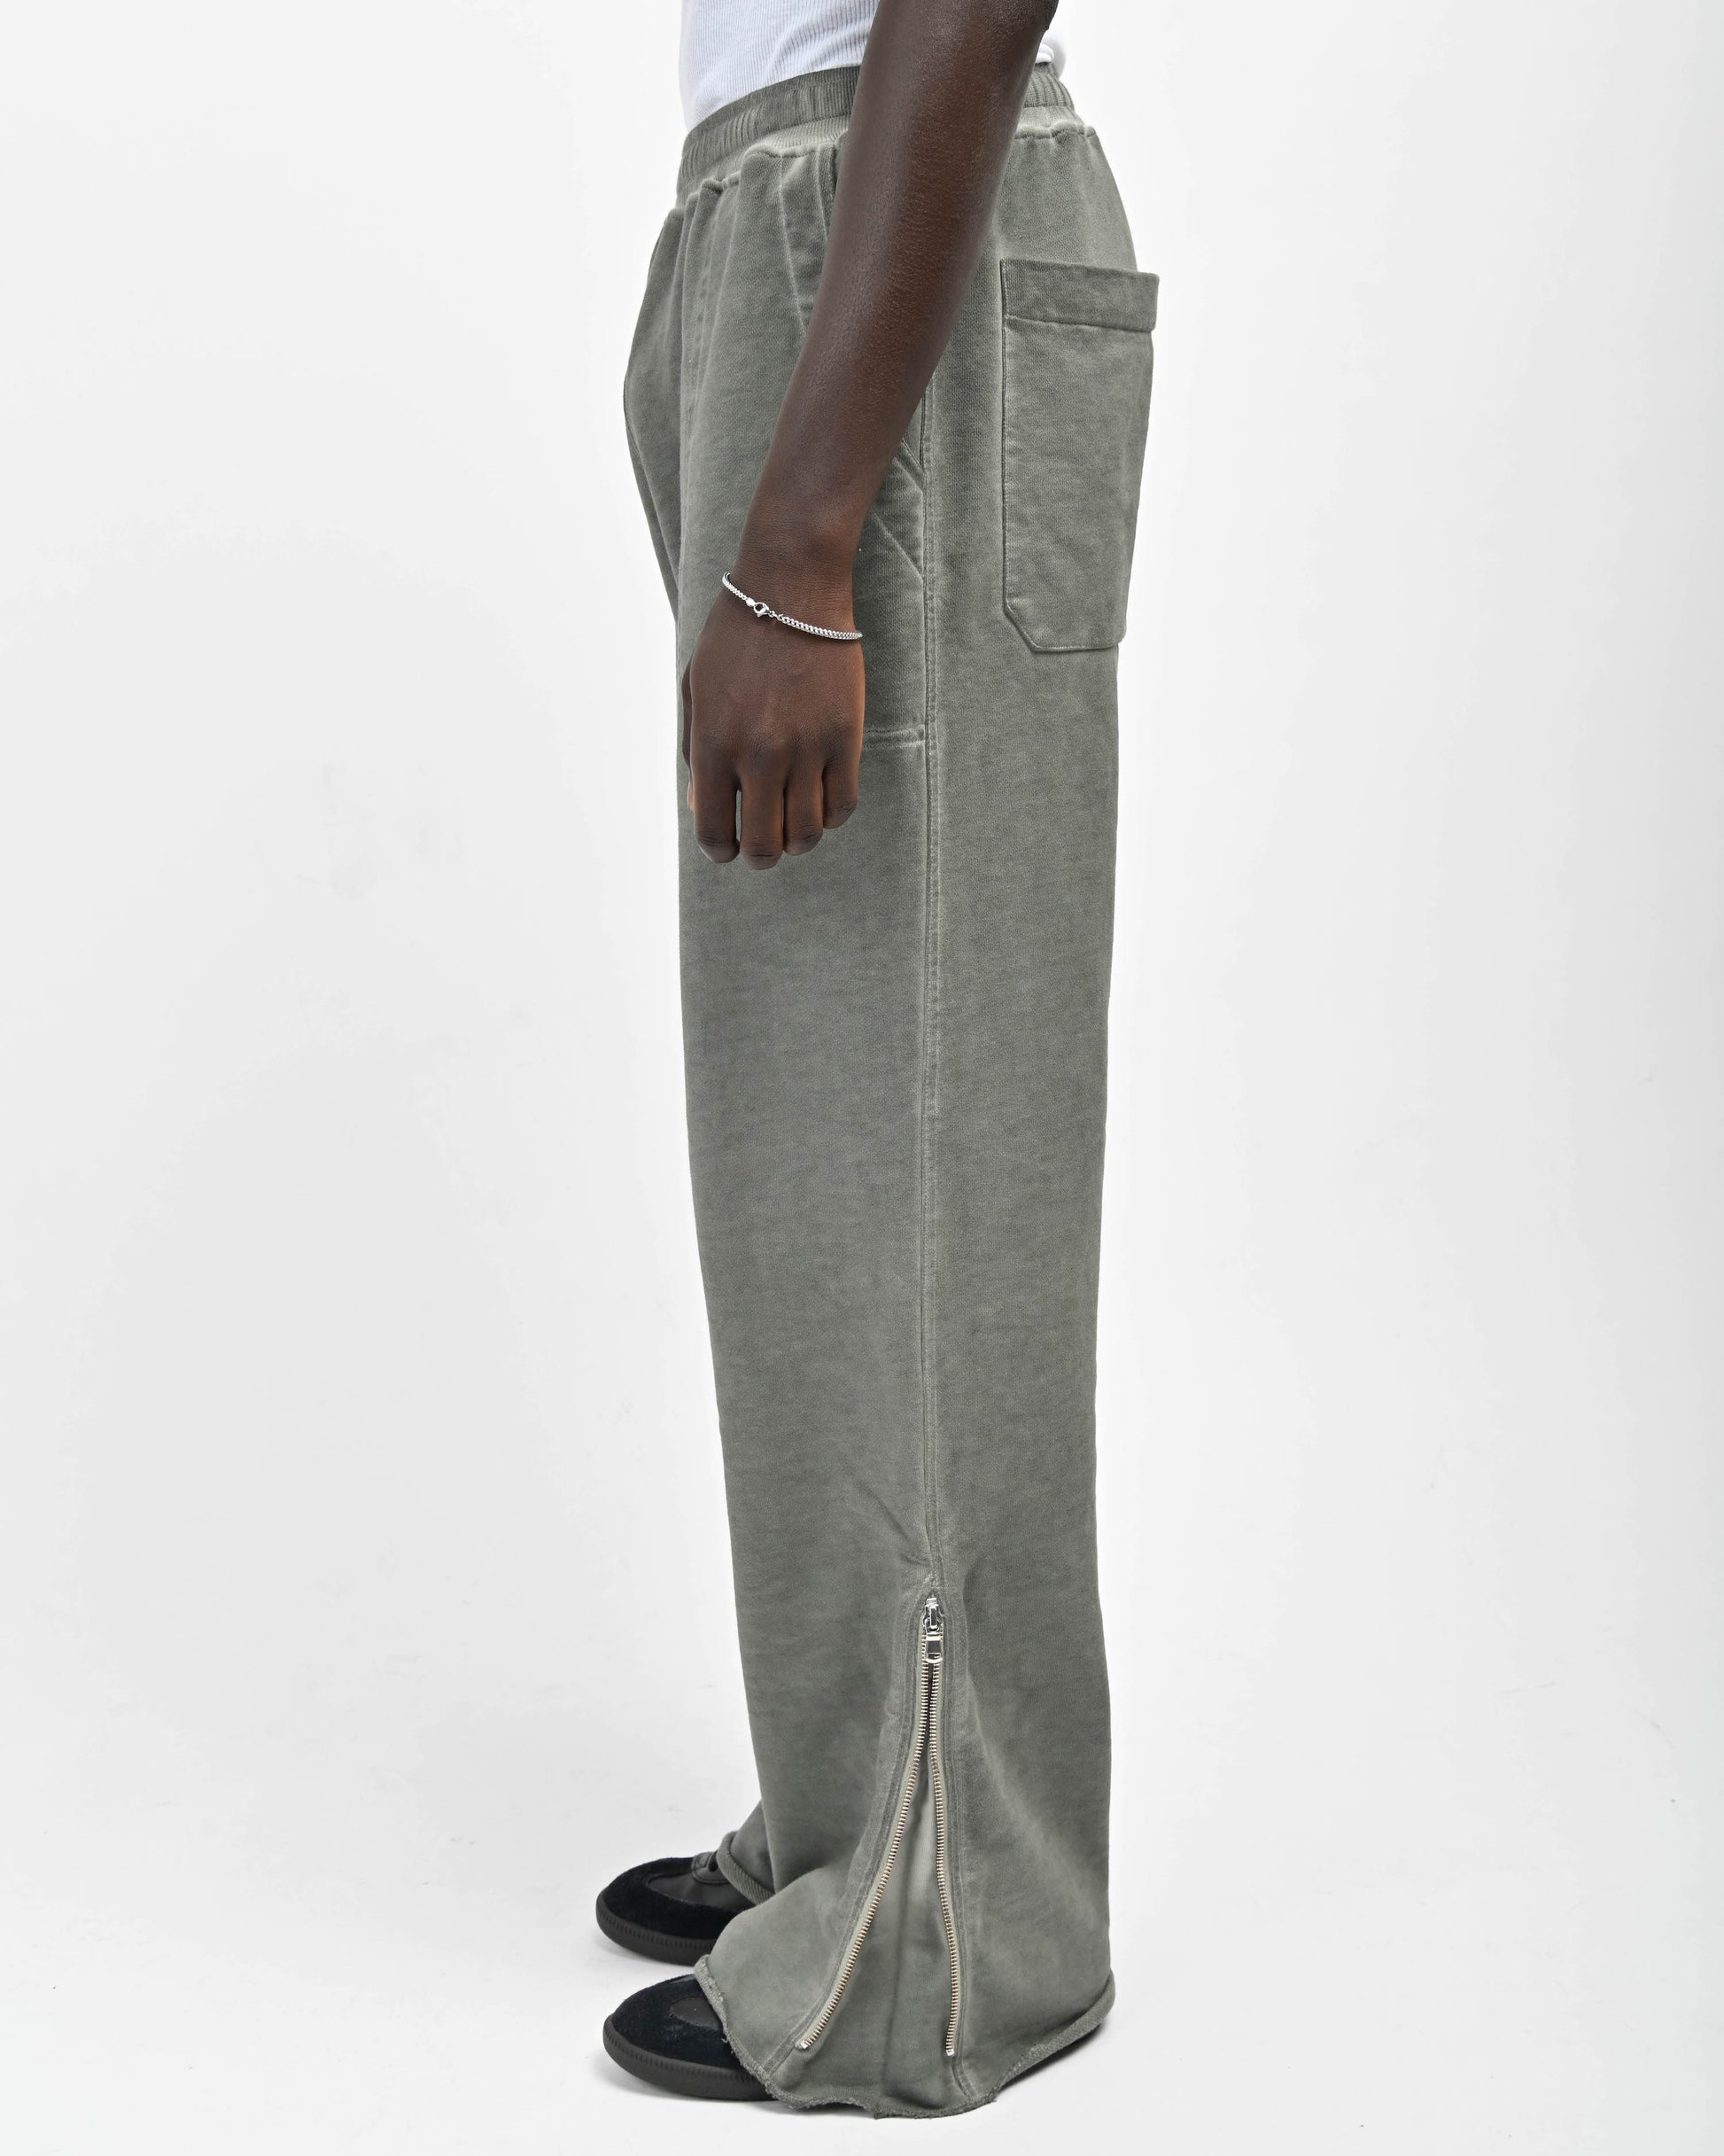 Side View of Zipper on Allora Track Pants by Aseye Studio